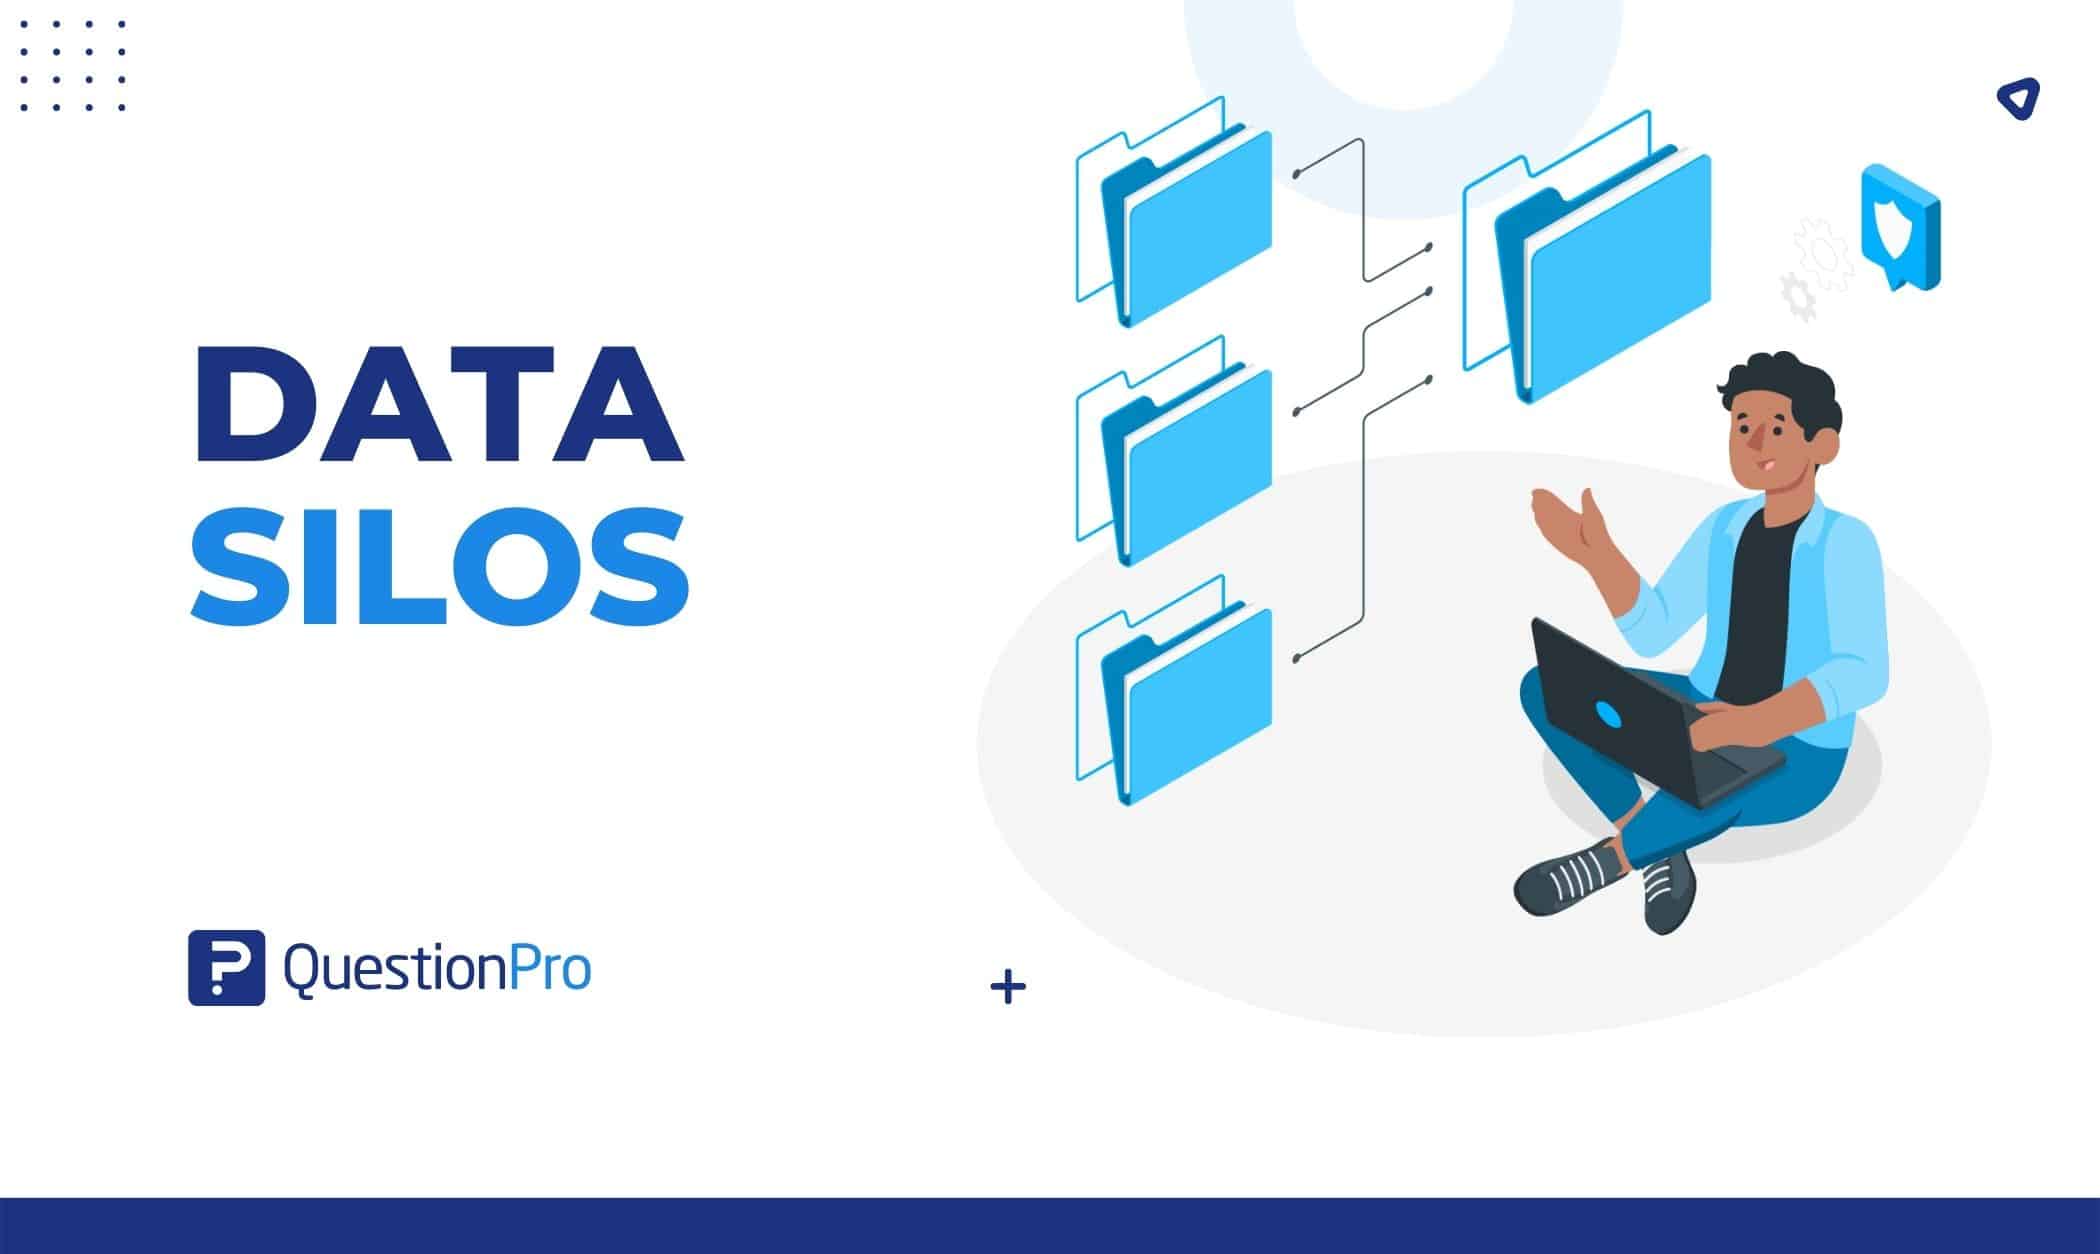 Data silos can affect a team's performance and management. Breaking down data barriers means better workflow insights and boost data validity.